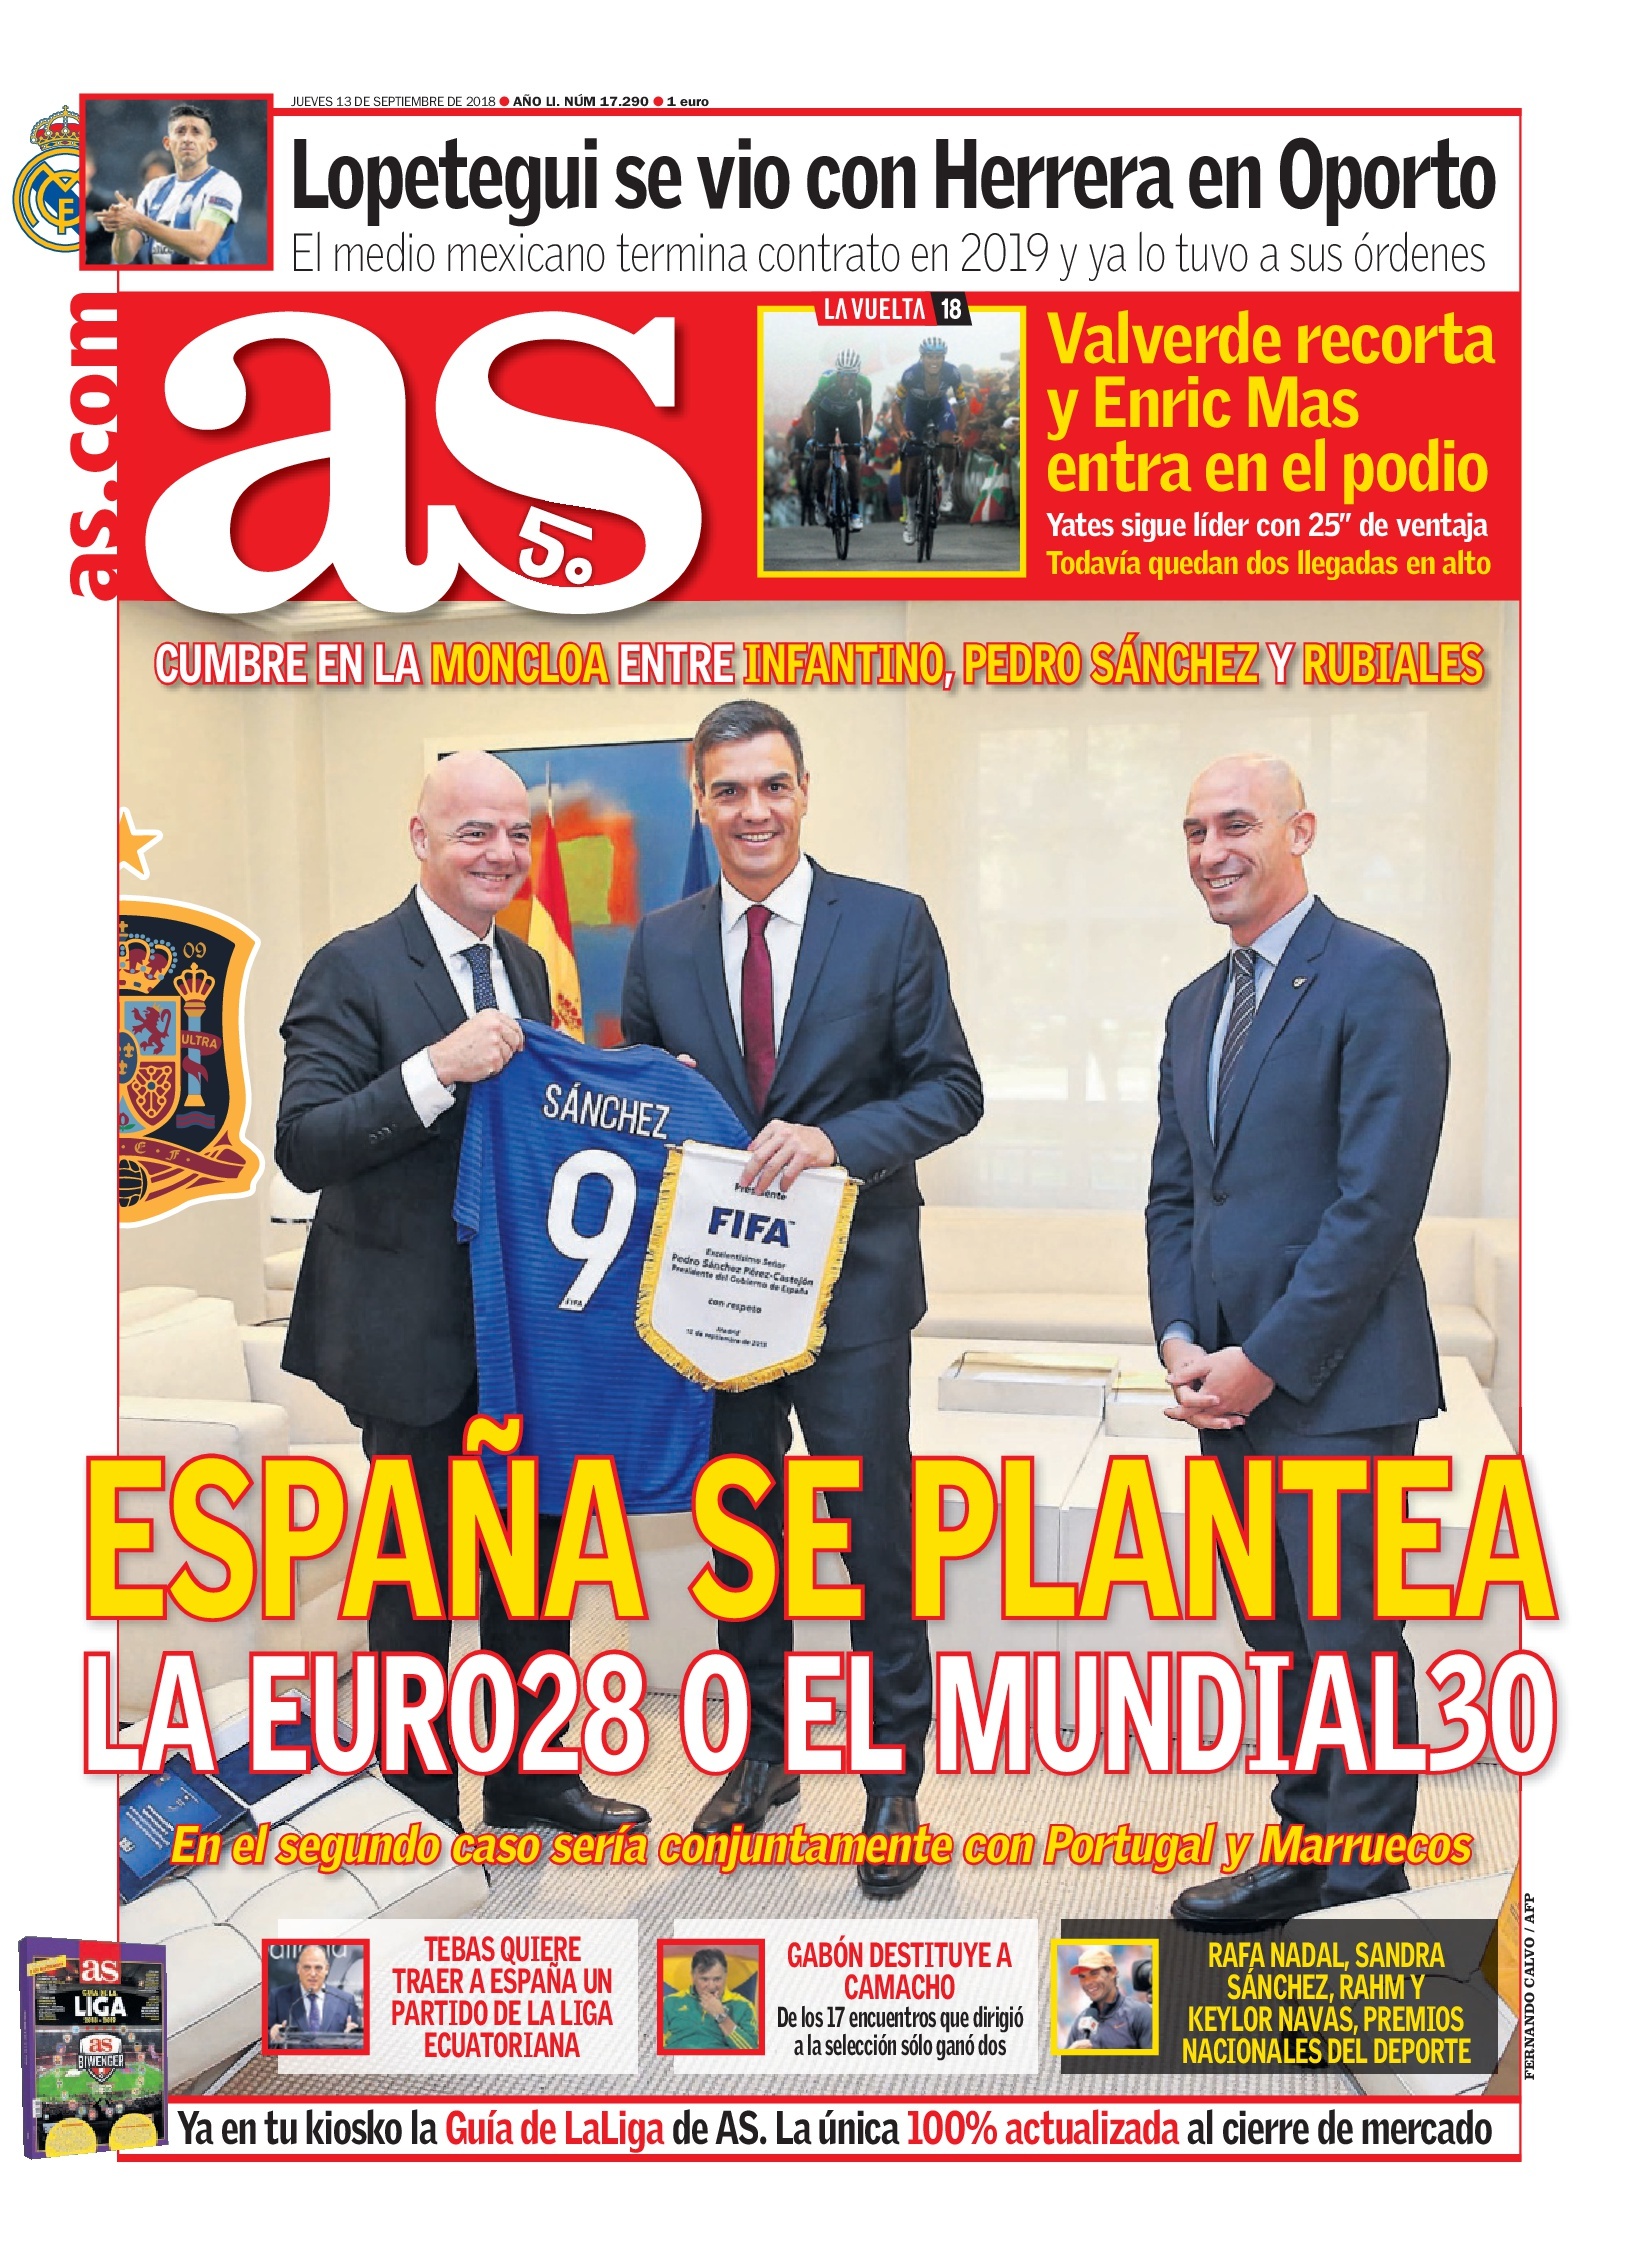 ¿Cuánto mide Gianni Infantino? - Altura - Real height Actualidad_337726253_96902012_1638x2268